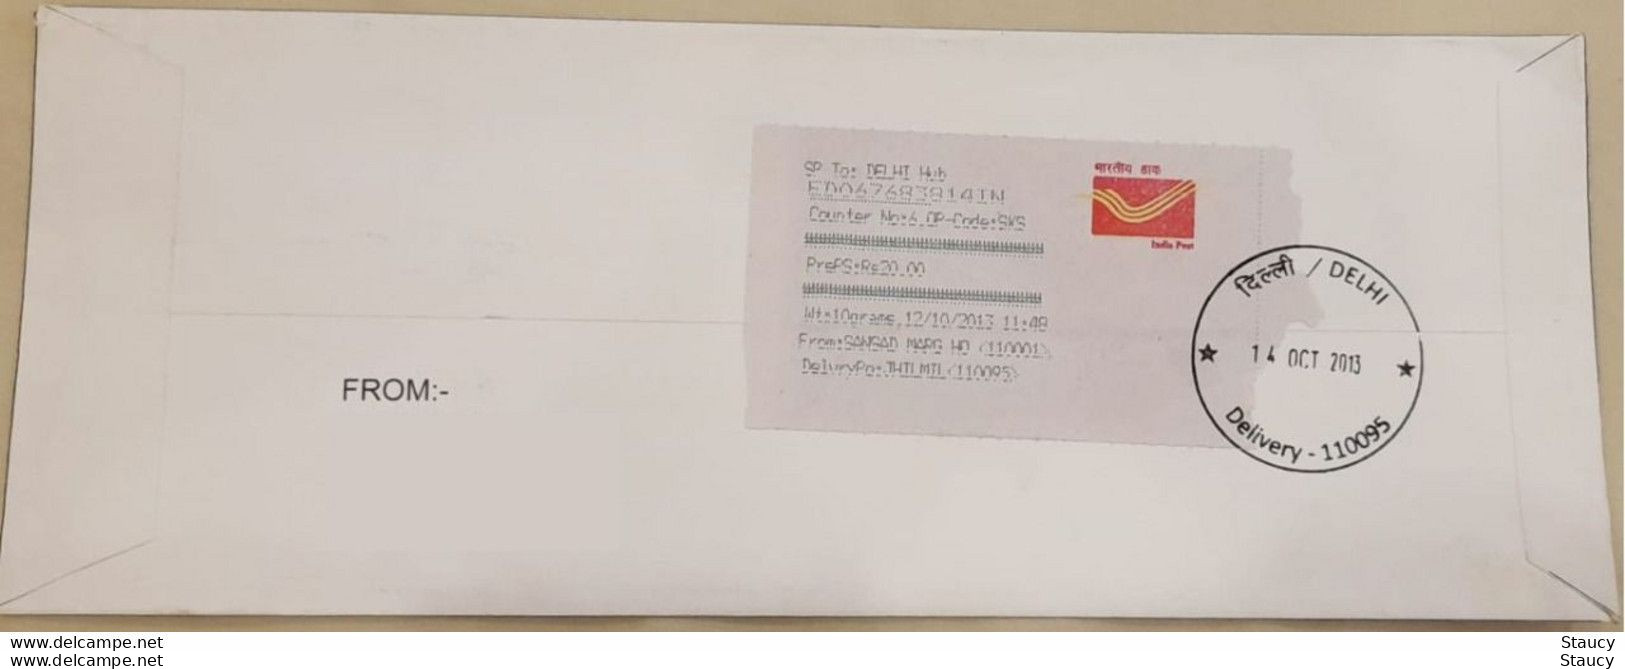 INDIA 2013 MAHATMA GANDHI MS First Day Cancelled Franked On Issue Date REGISTERED SPEED POST COVER As Per Scan - Covers & Documents